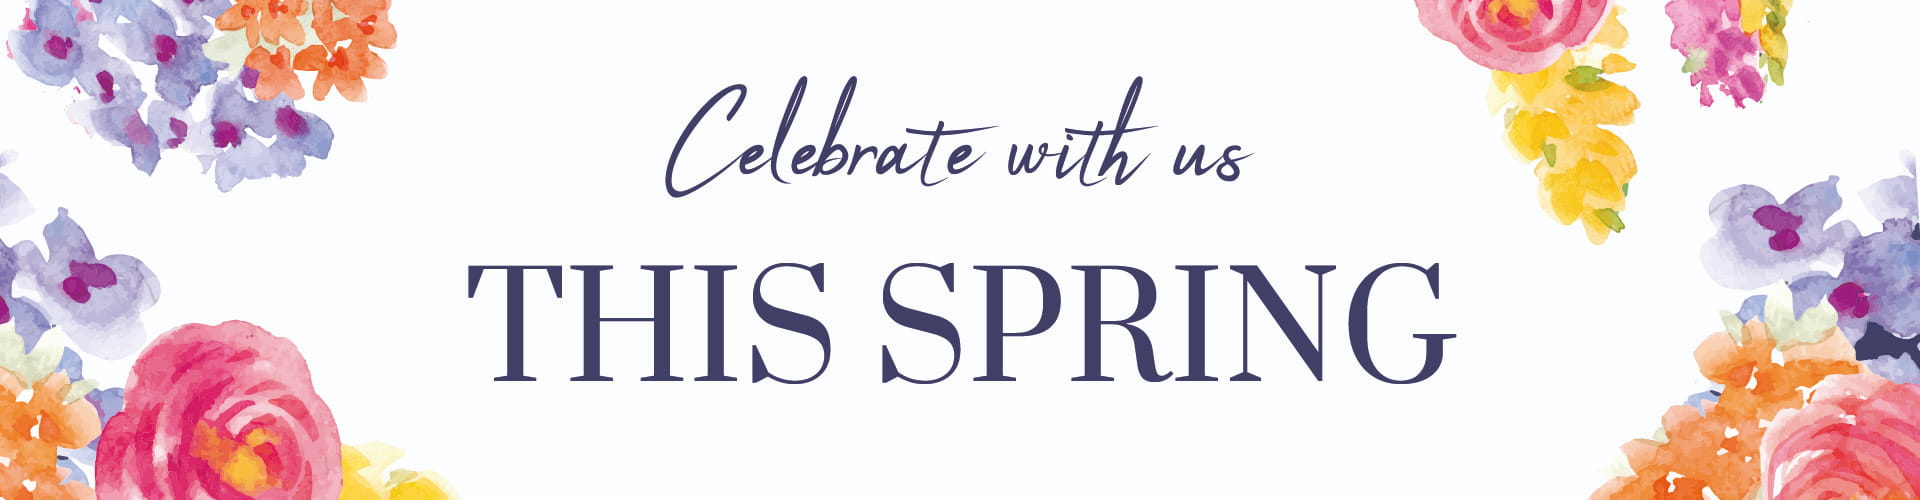 Spring Offers in Linlithgow | West Port Hotel